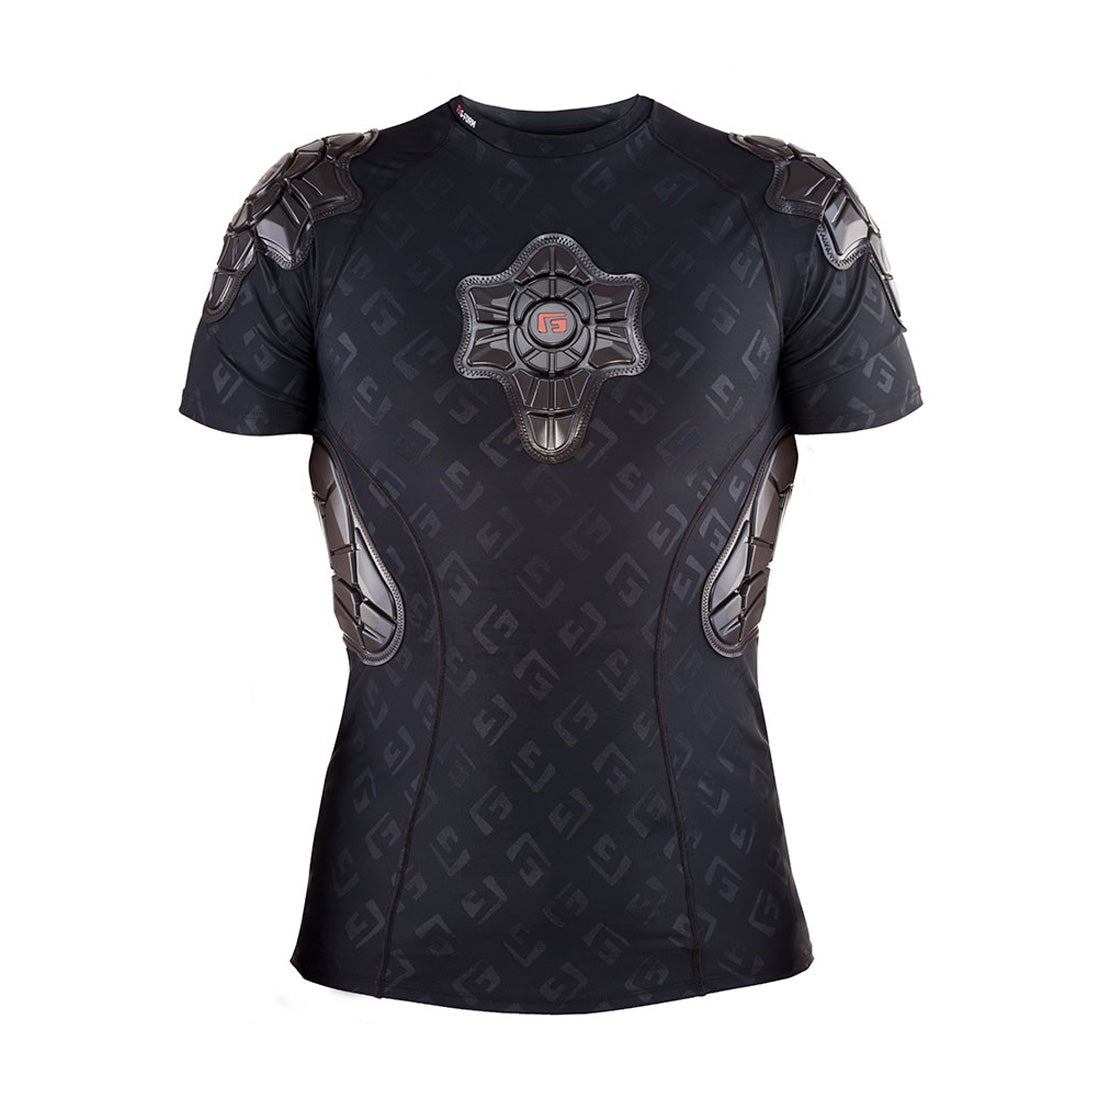 G-Form Pro-X Compression Shirt - Adult Protective Gear